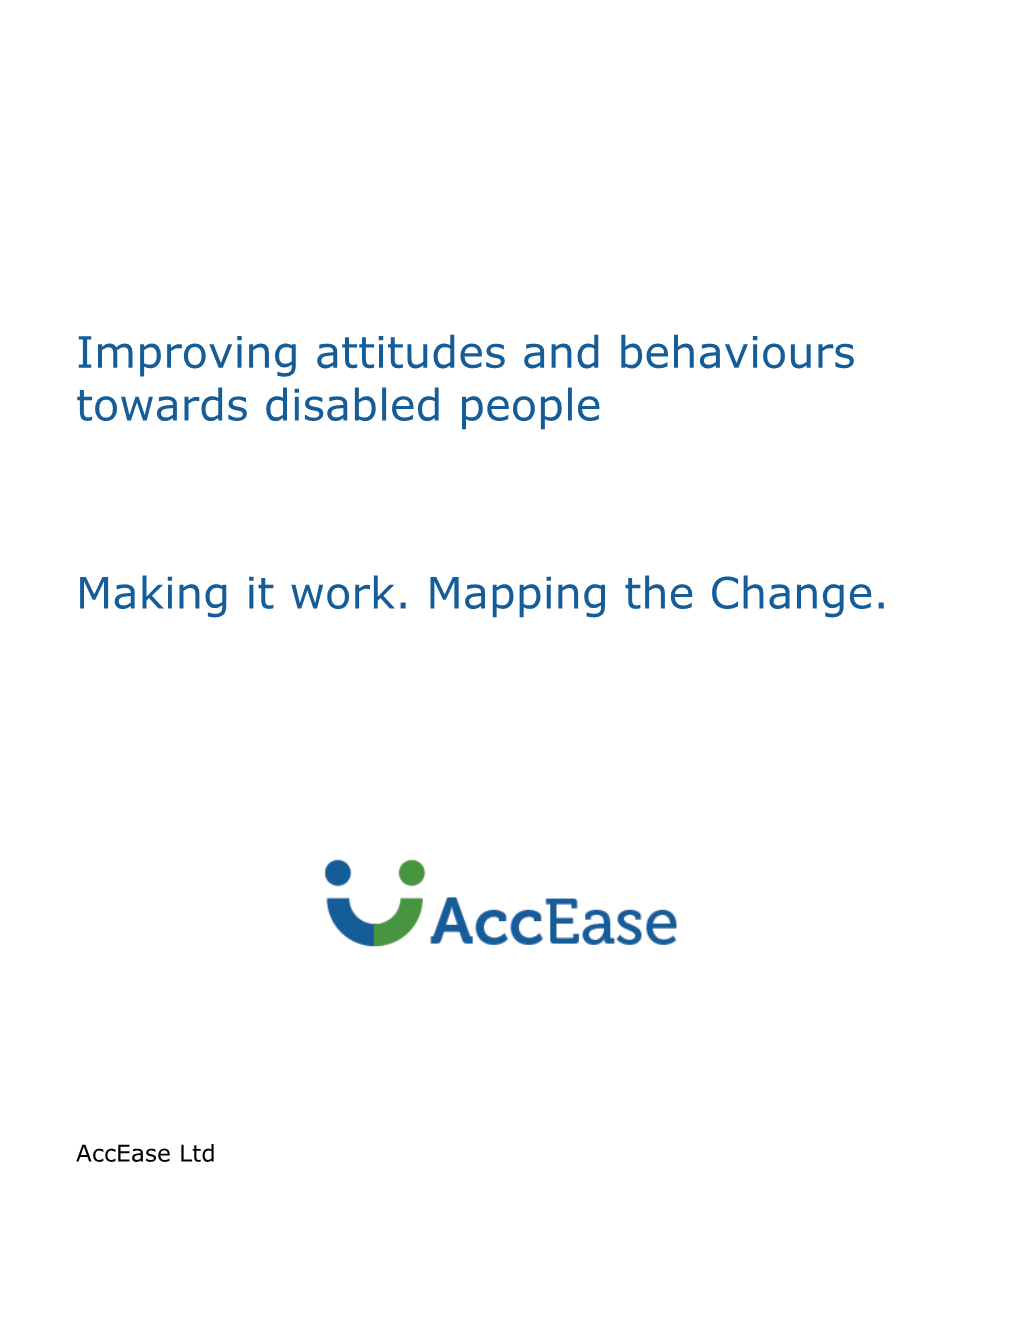 Improving Attitudes and Behaviours Towards Disabled People